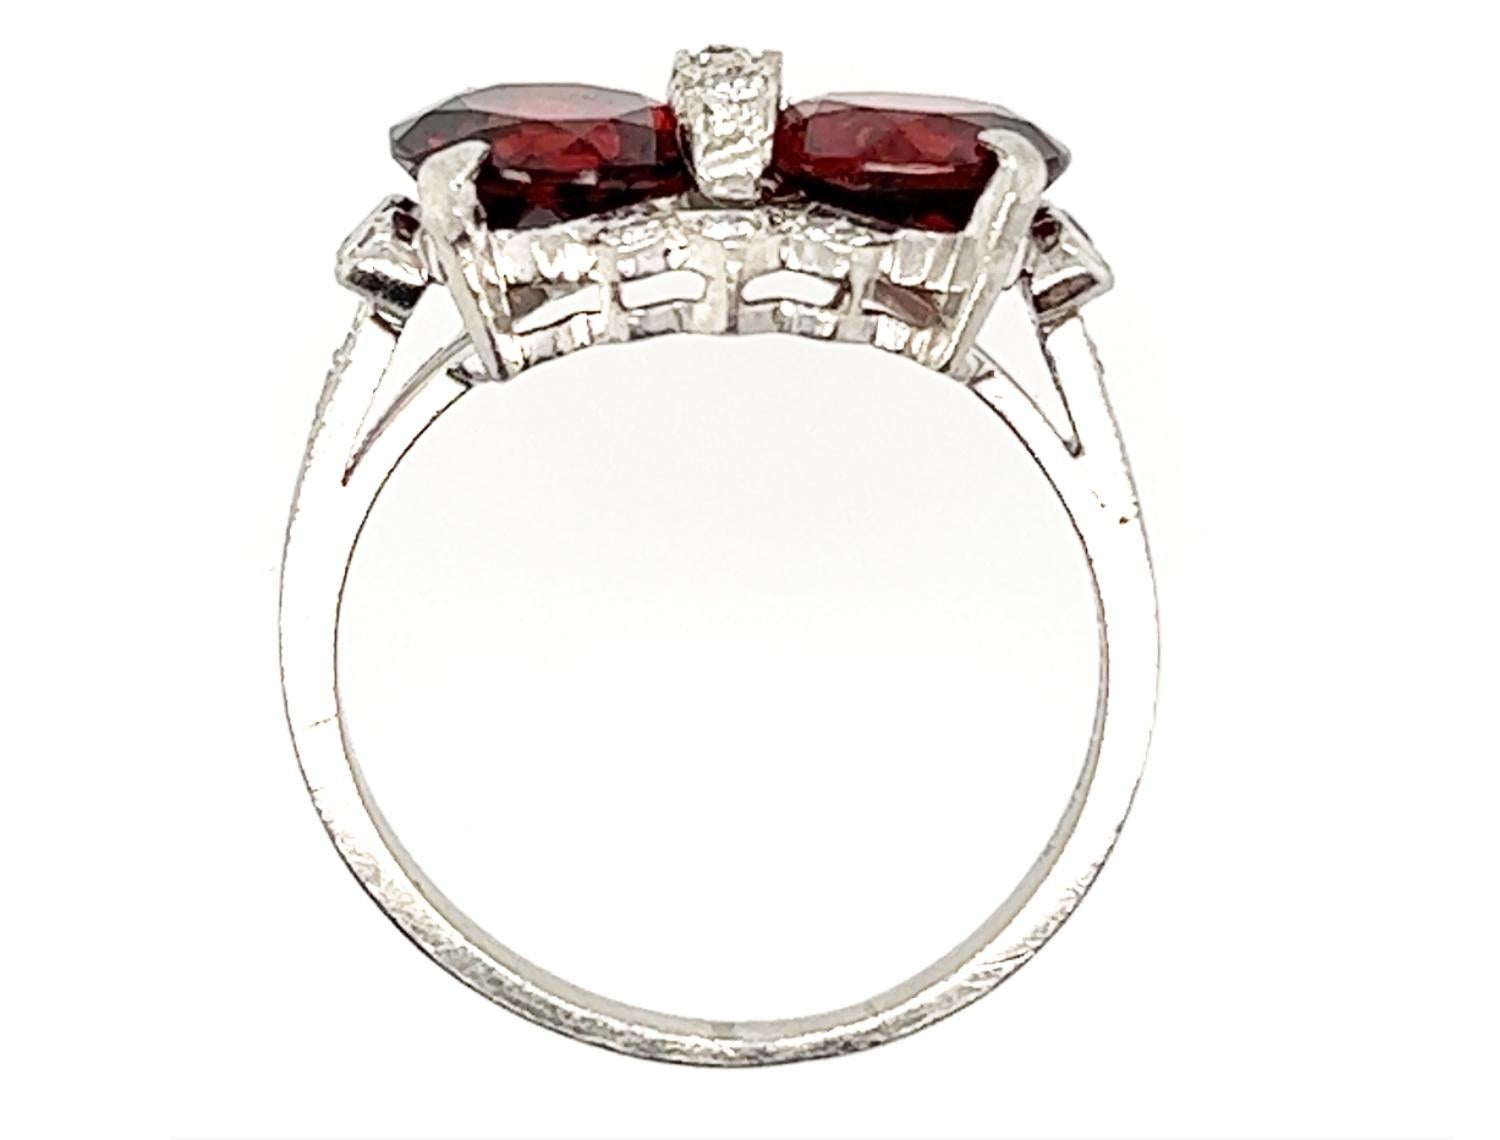 Genuine Original Victorian Antique from 1880's-1890's Garnet Diamond 2 Stone Ring 4.40ct Platinum


Features Two Vibrant 2 Carat Genuine Natural Round Garnet Gemstones

Trademarked and Numbered - BB&B 84835 - Bailey Banks and Biddle The company was